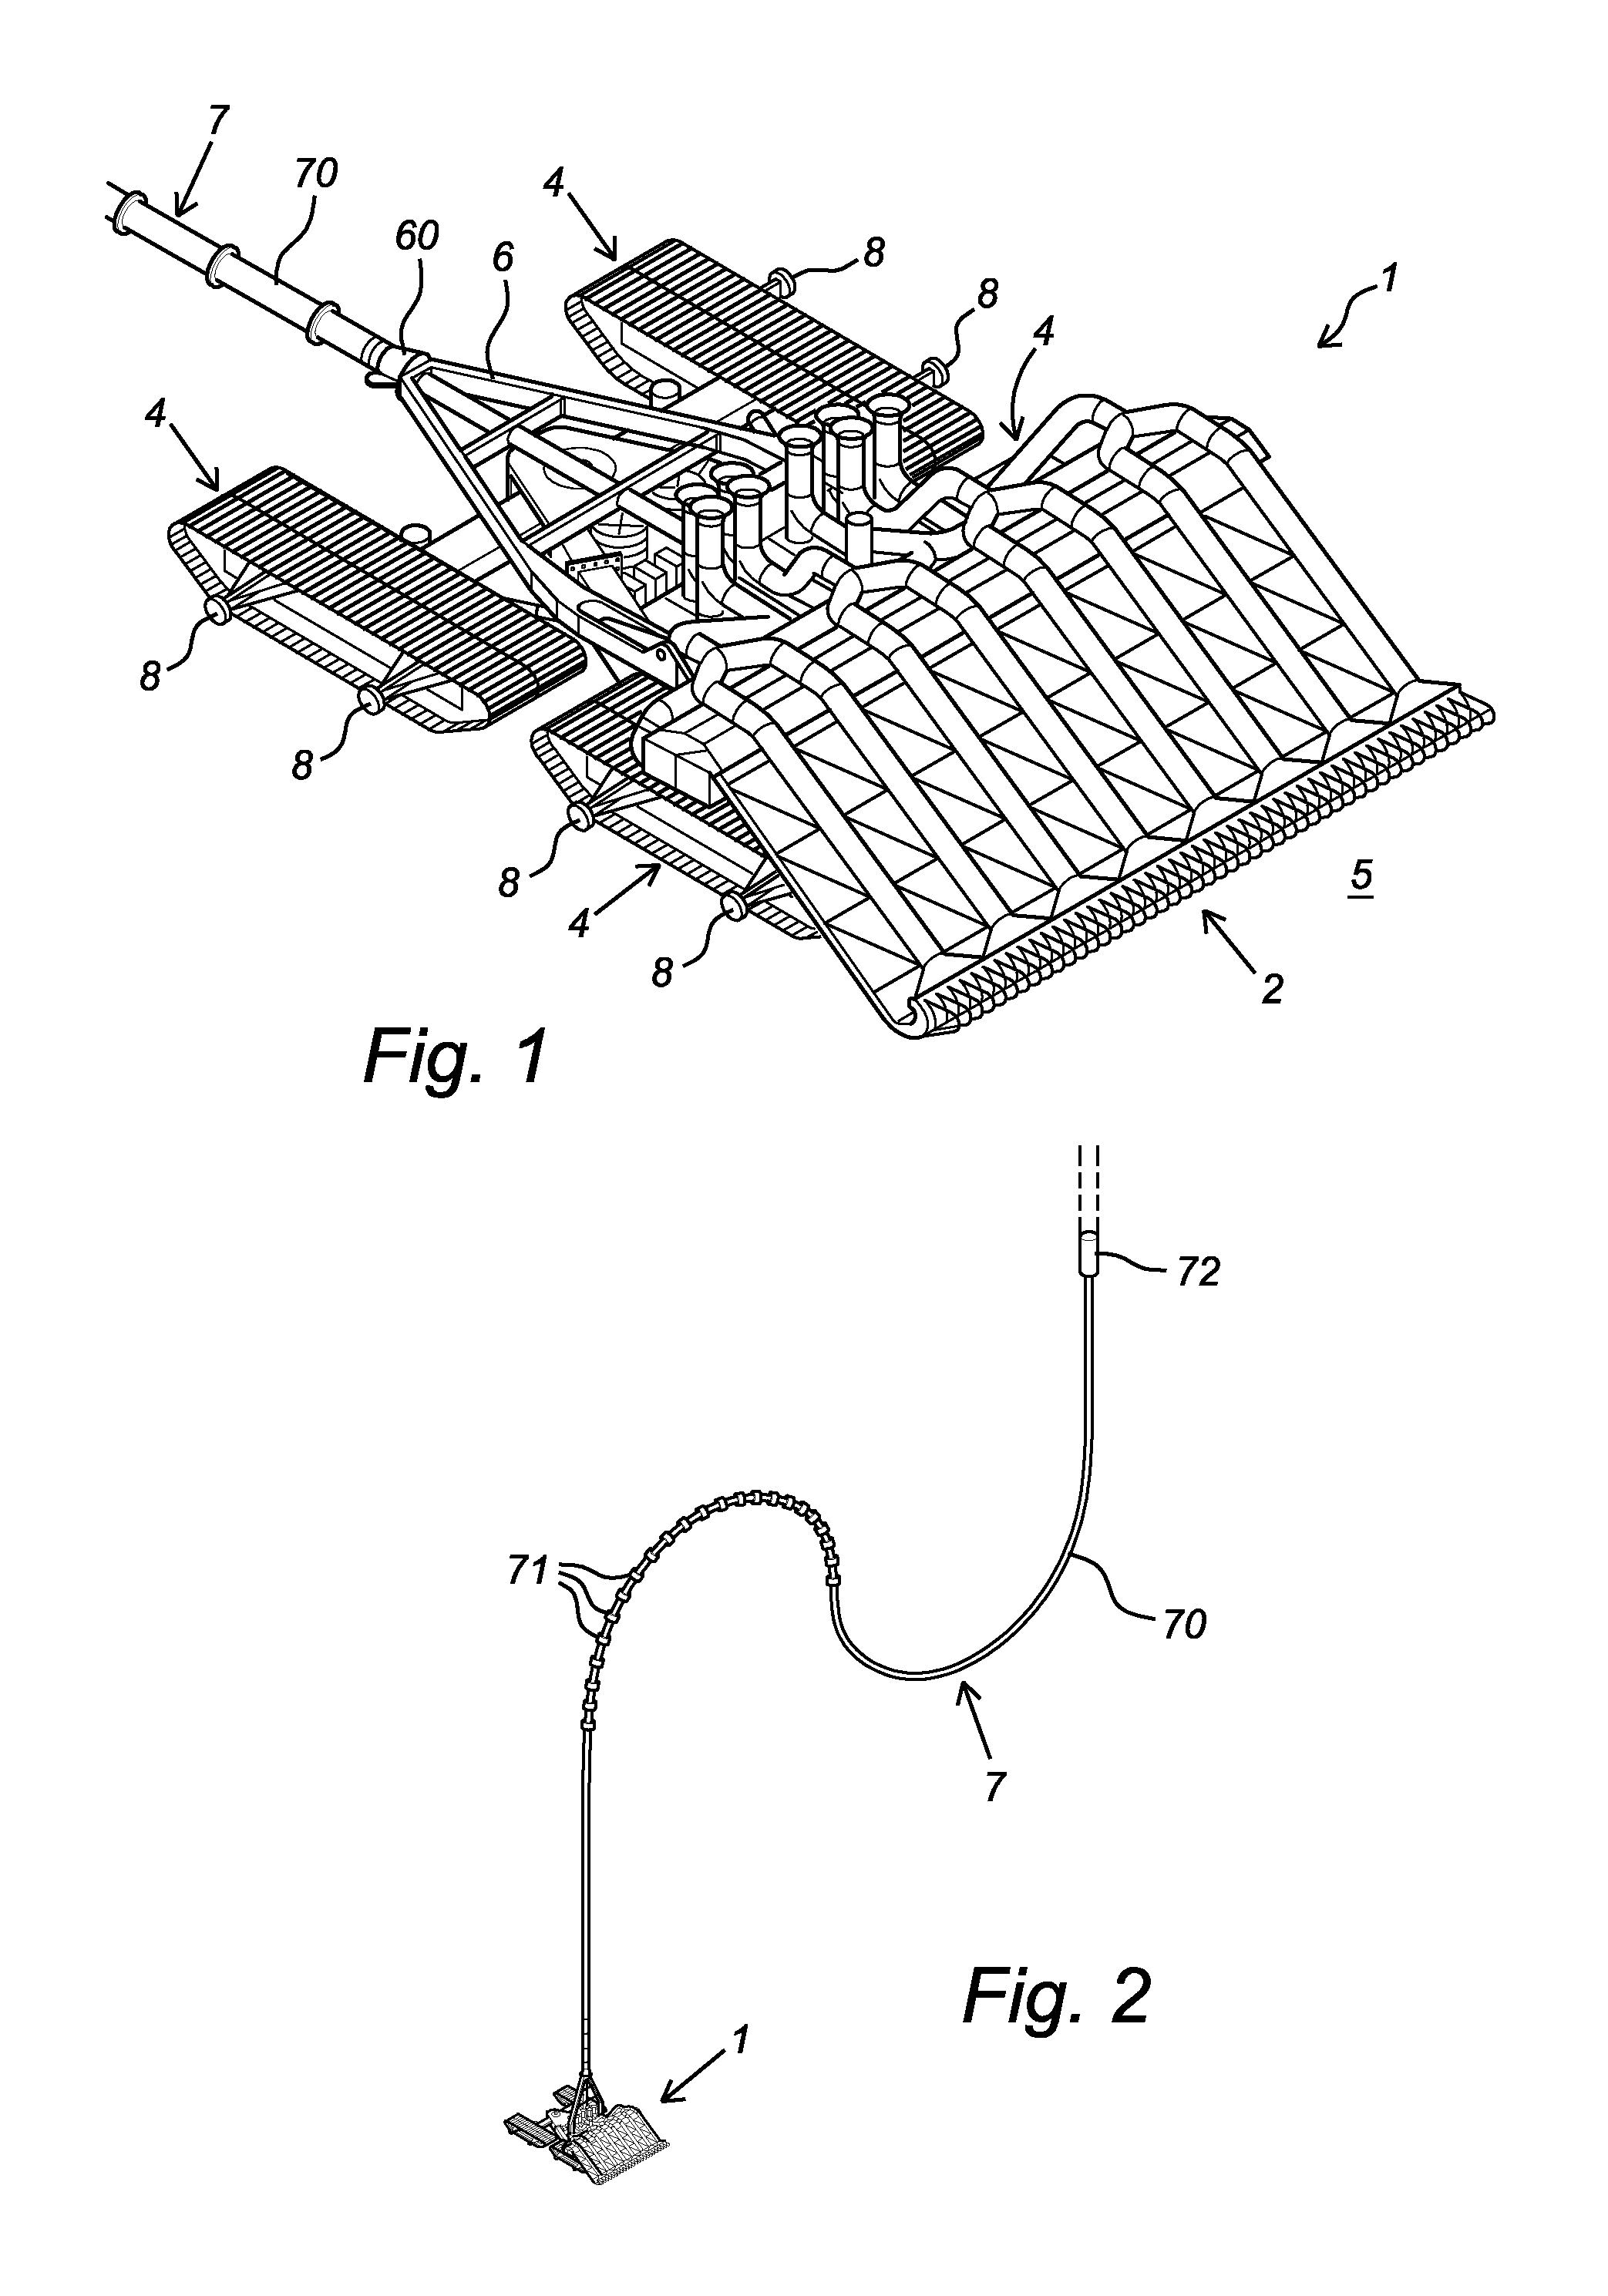 Device for Launching a Subsurface Mining Vehicle Into a Water Mass and Recovering the Same from the Water Mass